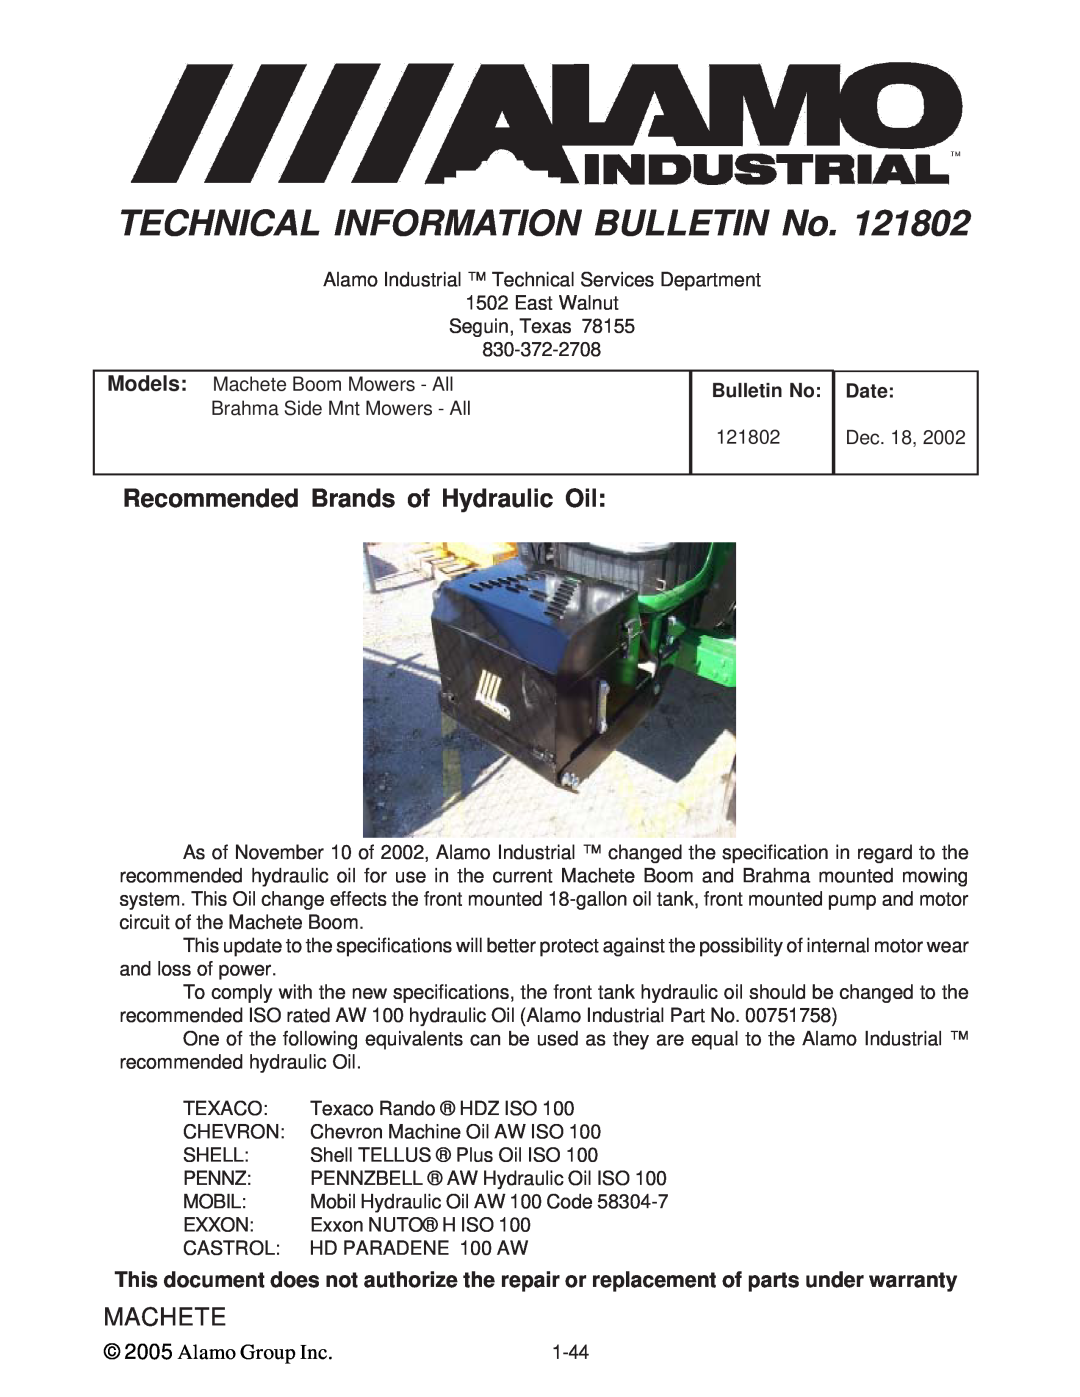 Alamo T 7740 Recommended Brands of Hydraulic Oil, TECHNICAL INFORMATION BULLETIN No, Machete, Alamo Group Inc, Bulletin No 